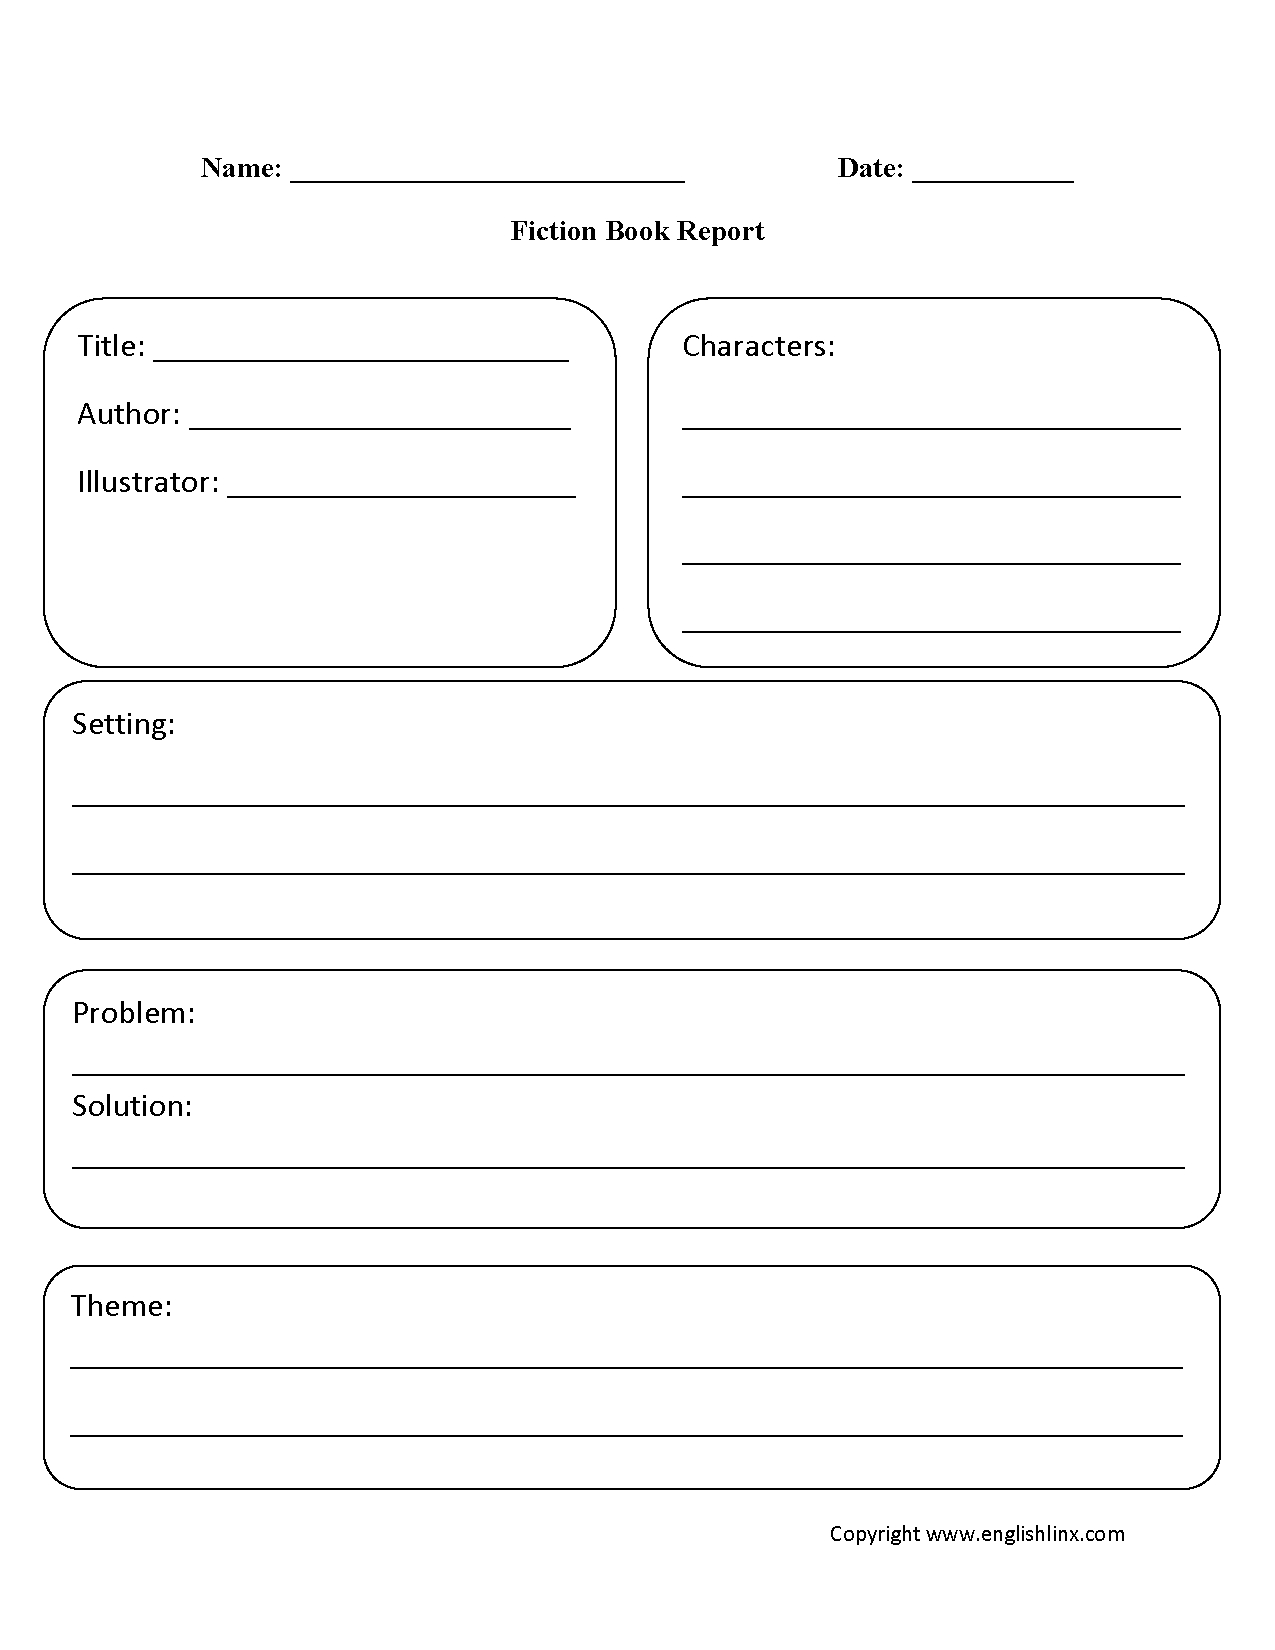 Englishlinx | Book Report Worksheets Intended For High School Book Report Template